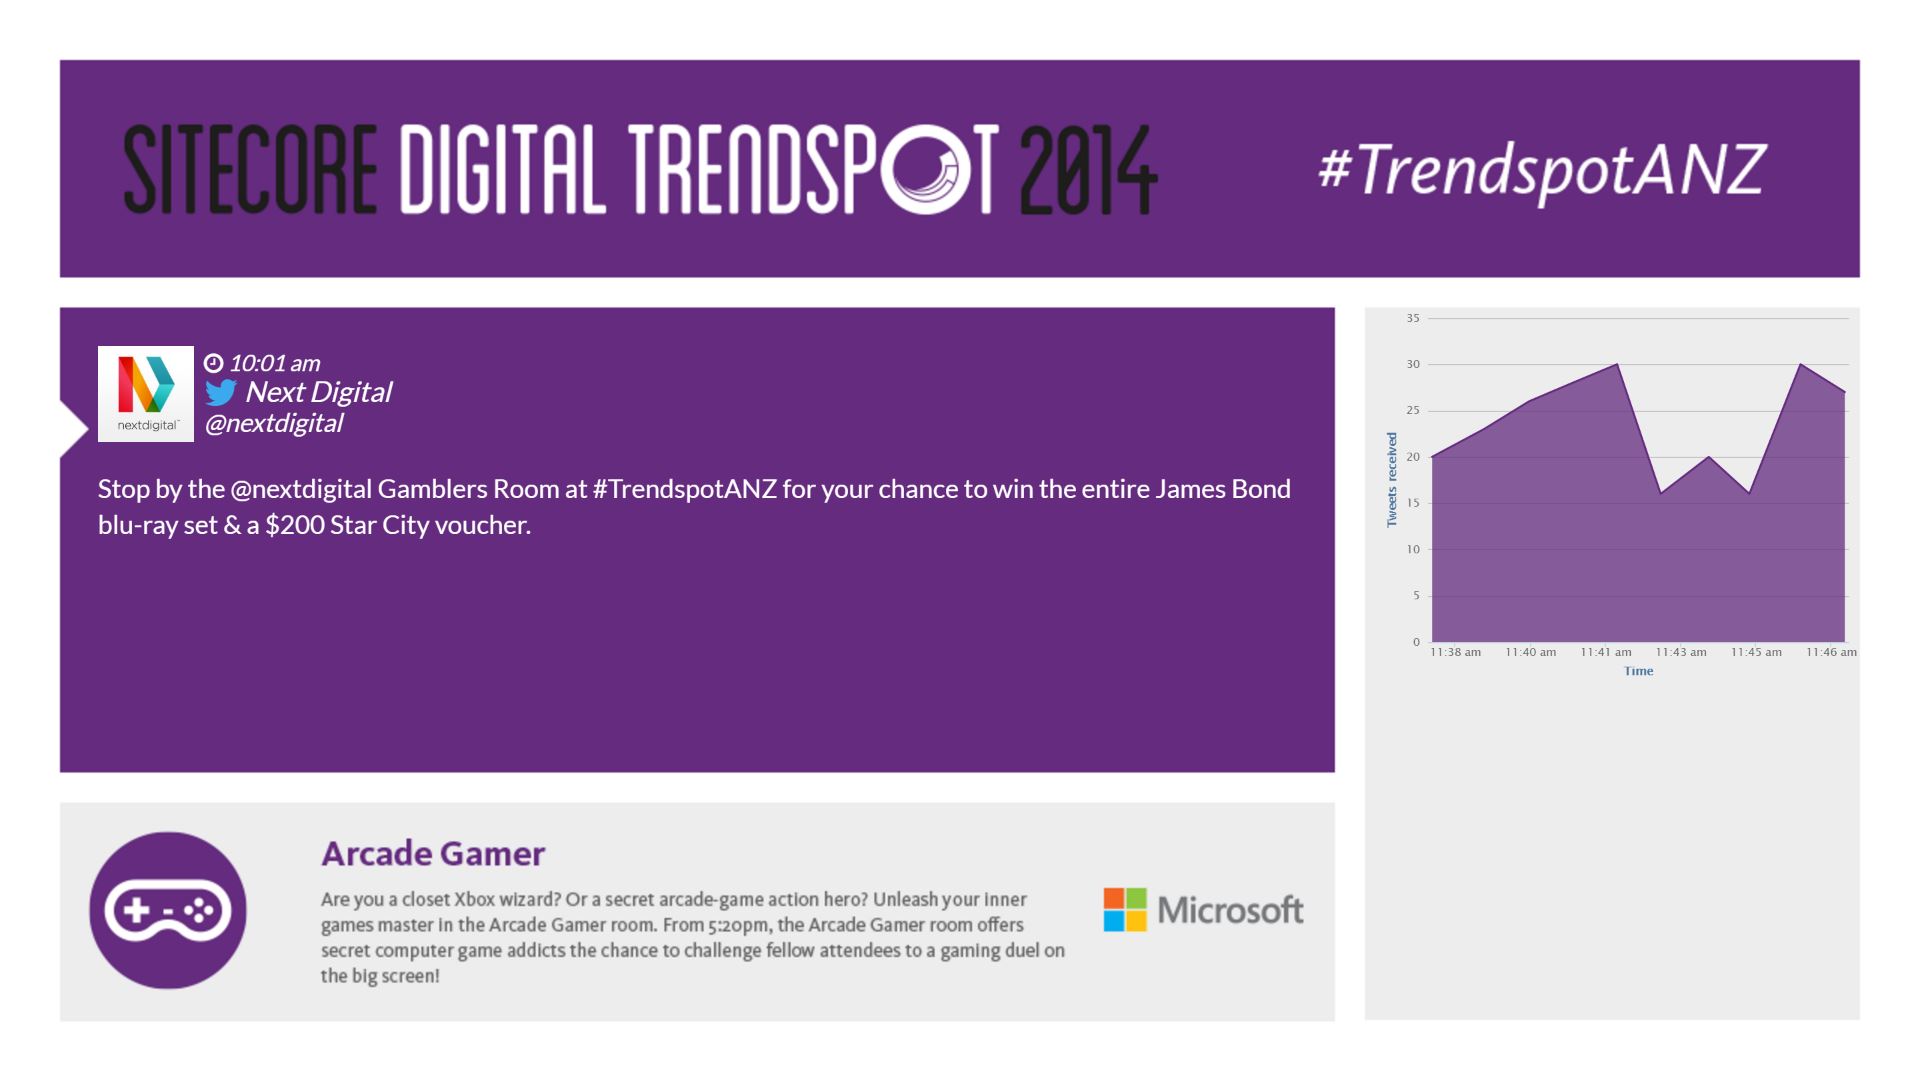 Tweet graph integrated on a social wall for Sitecore Digital Trendspot event 